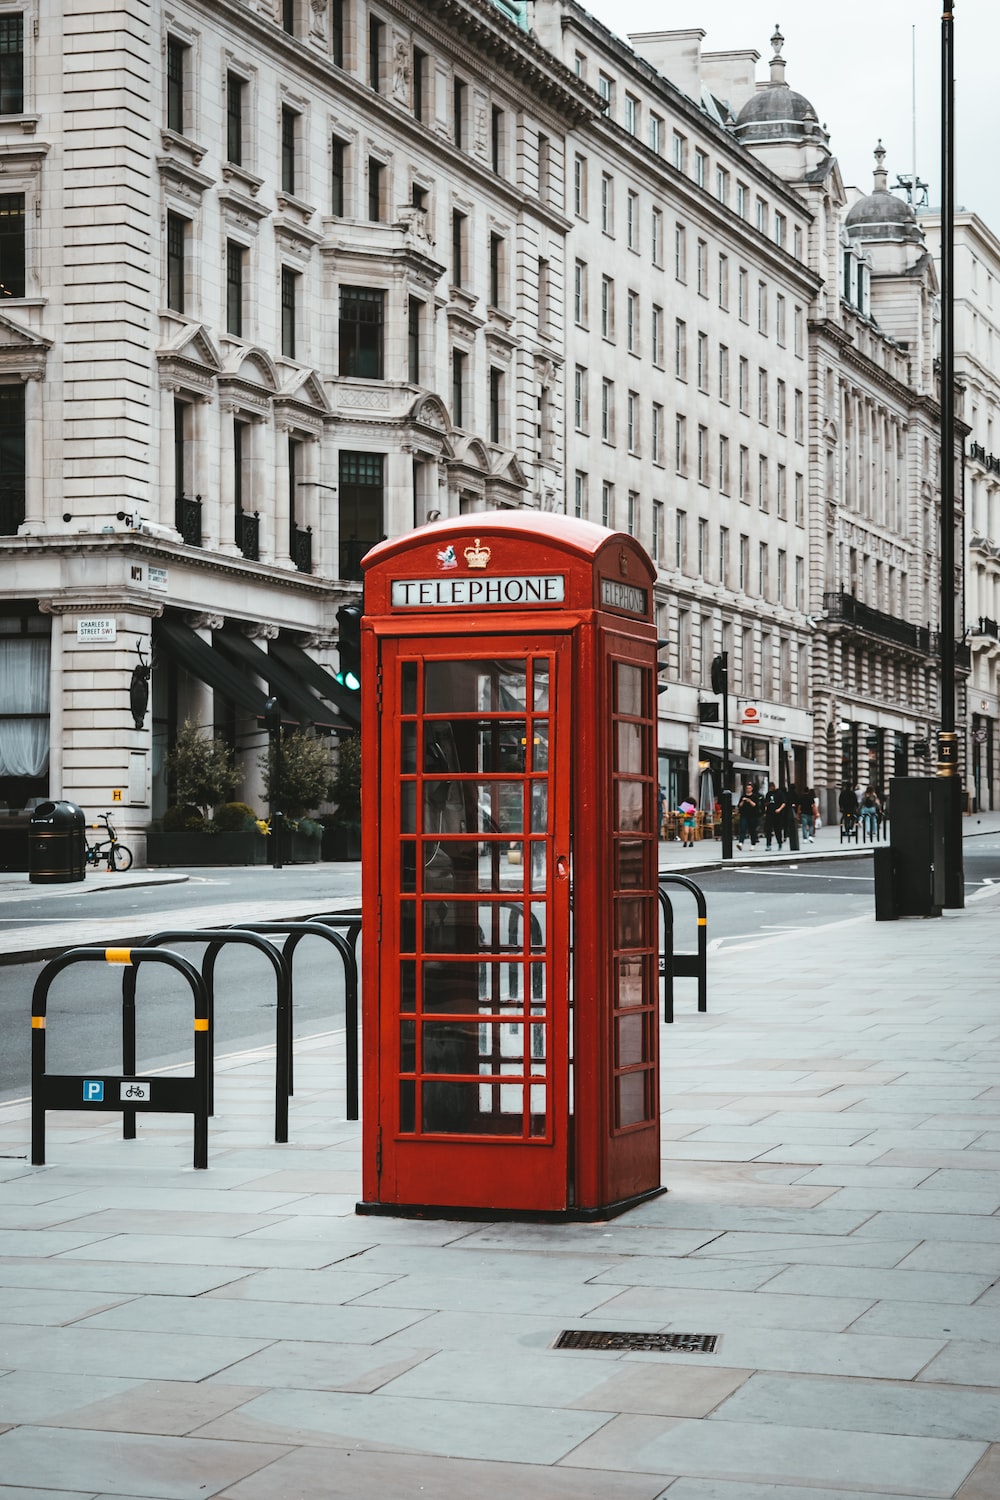 Telephone booth pictures download free images on